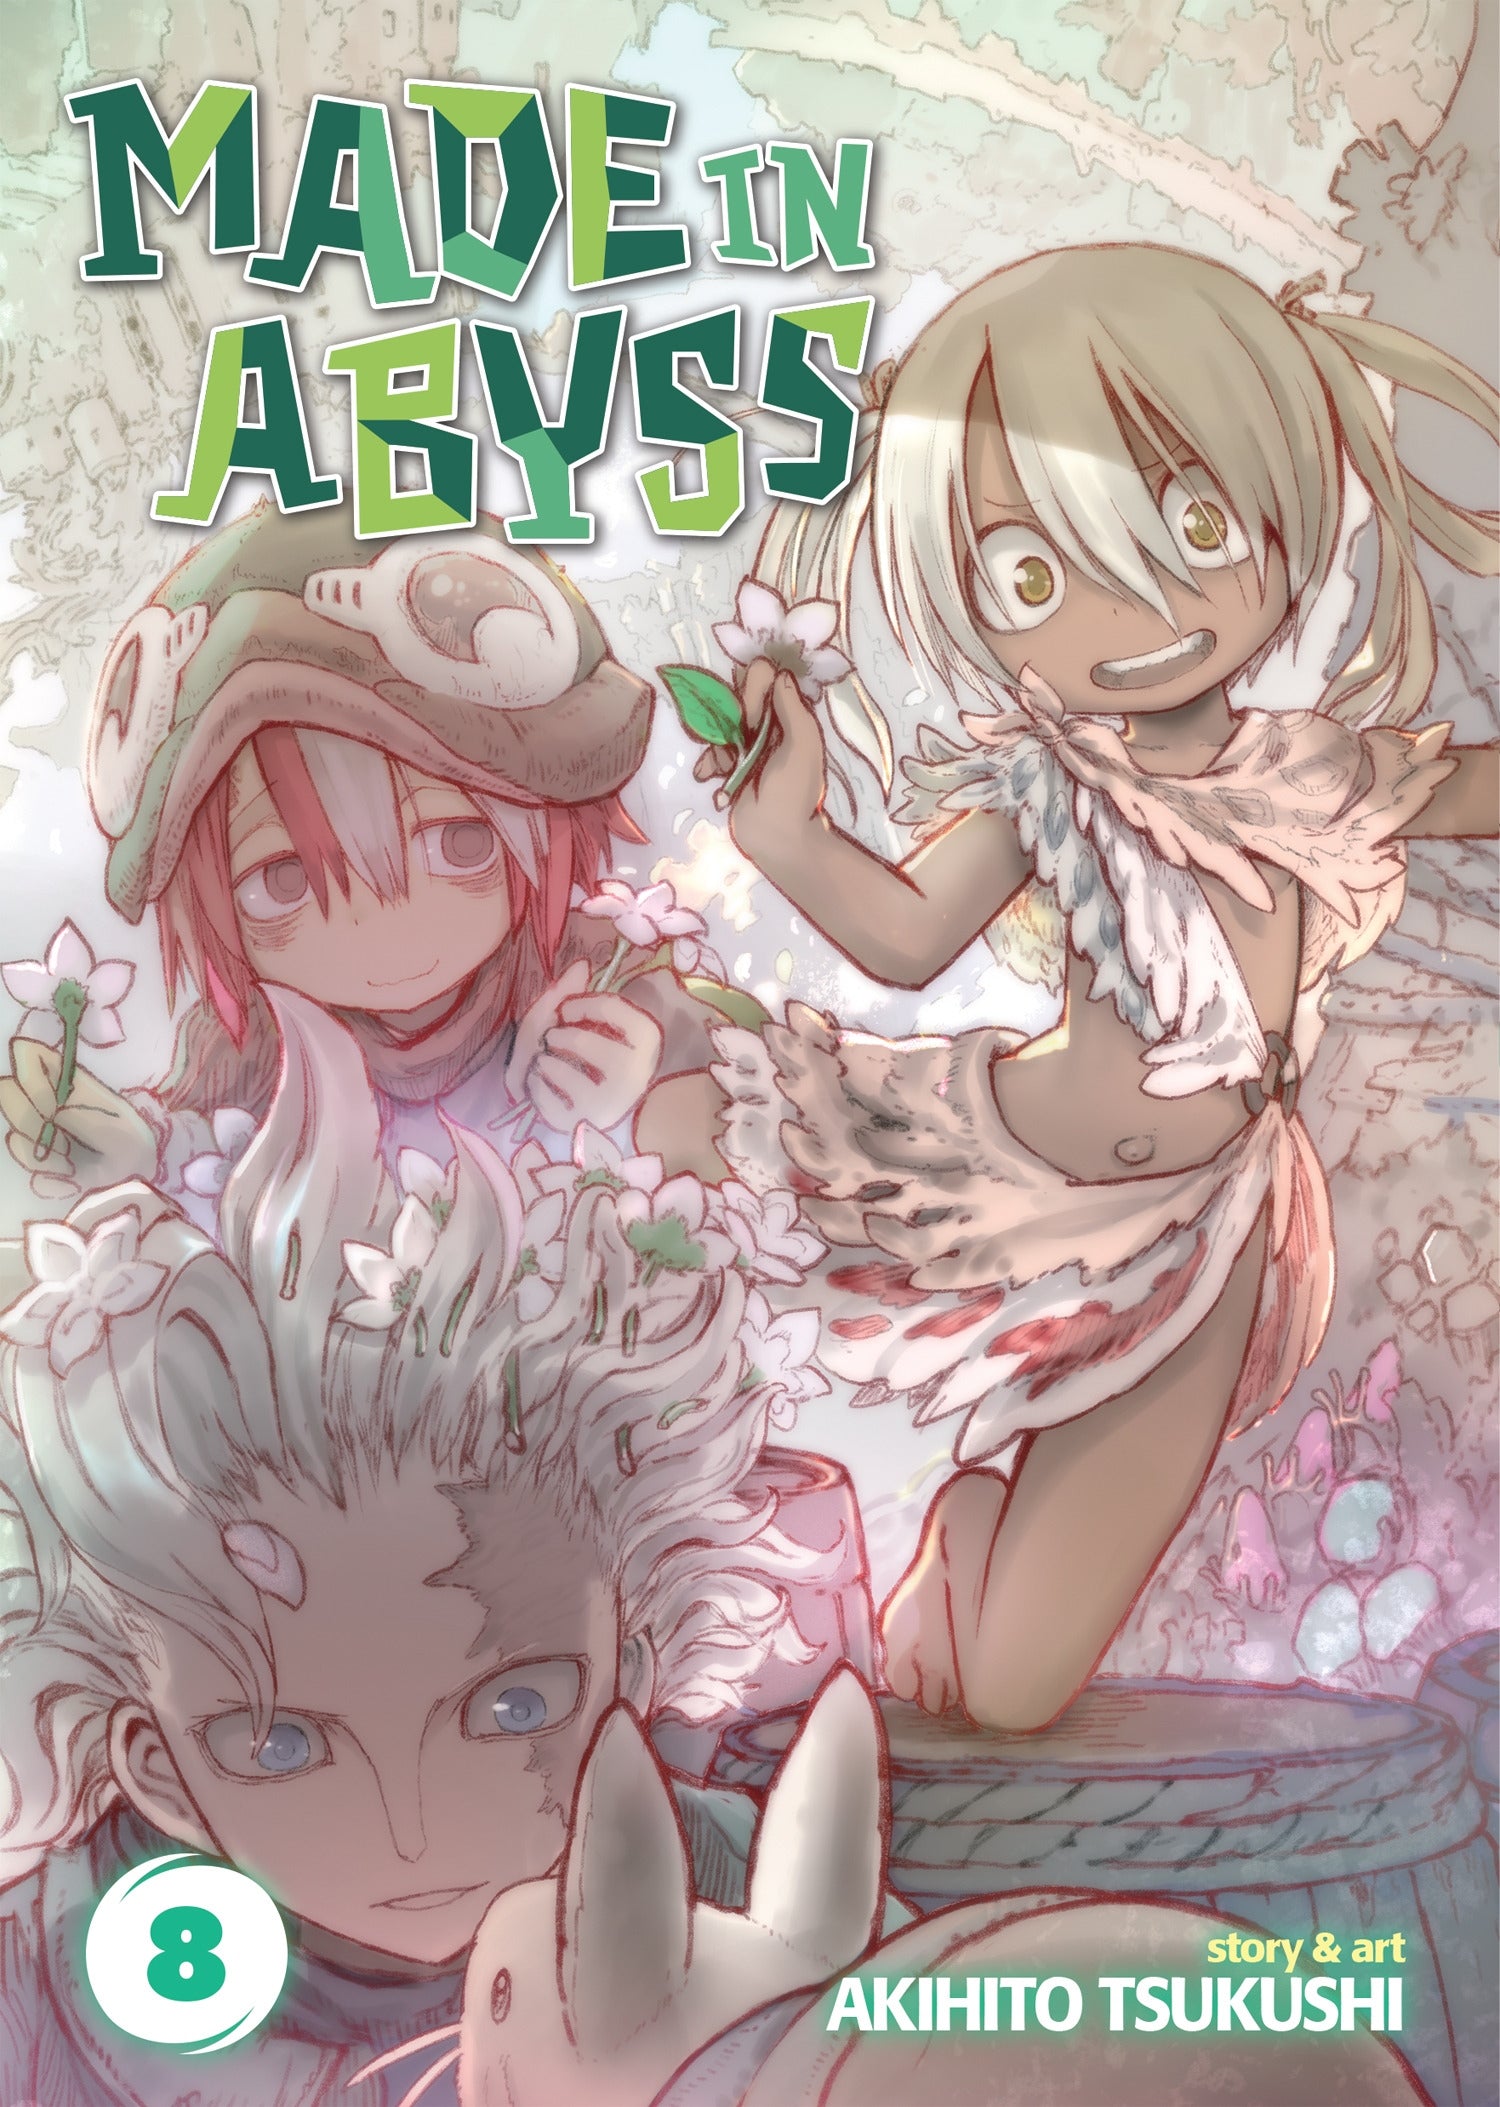 Made in Abyss Vol. 8 - Manga Warehouse